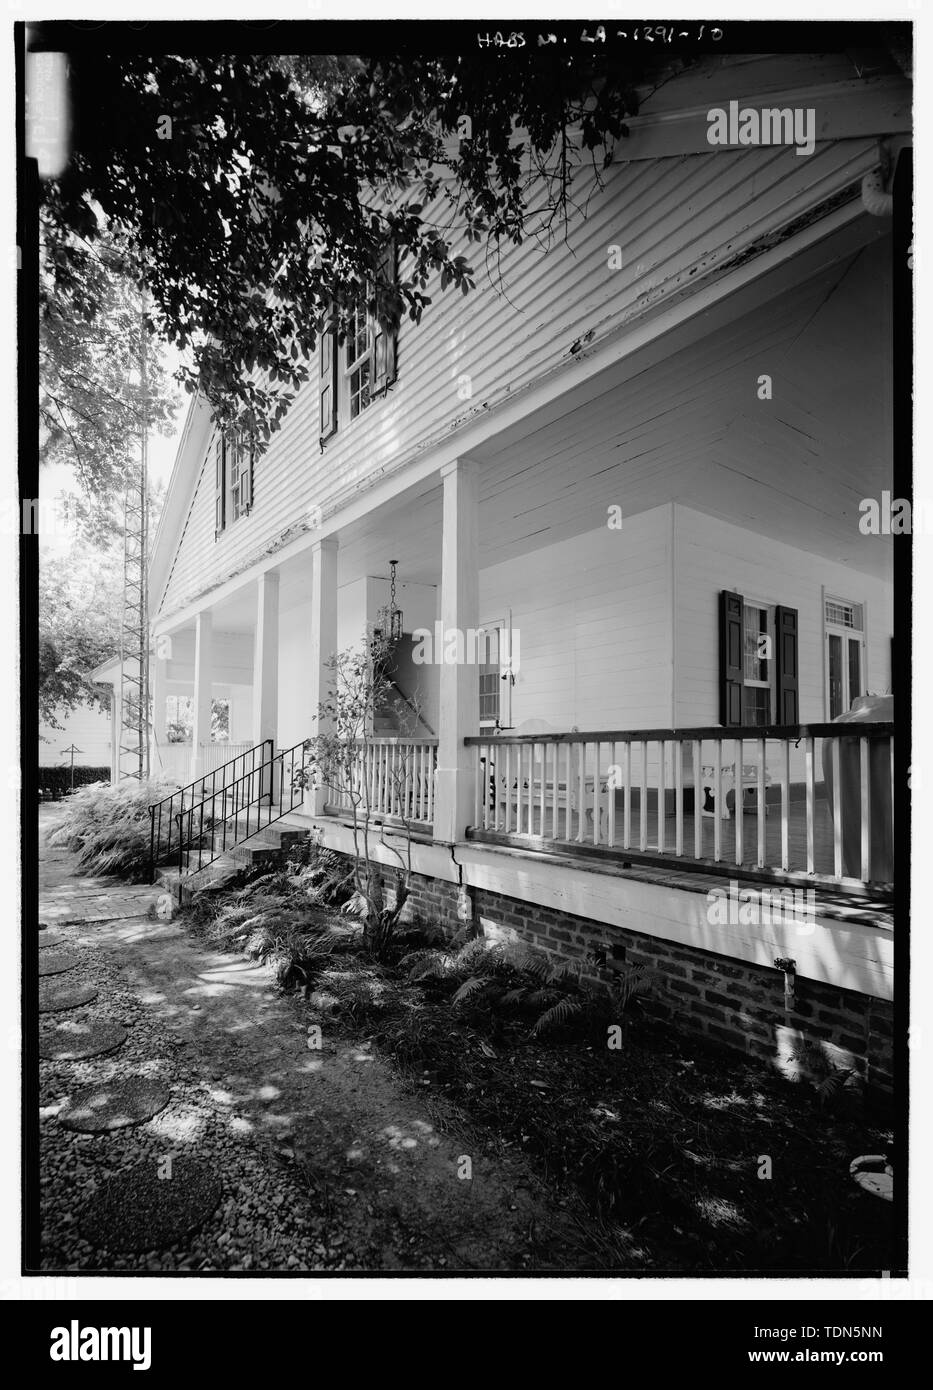 Perspective view of east elevation looking from the northeast to show stair to second floor - Beau Fort, 4055 State Highway 494, Natchez, Natchitoches Parish, LA; Prudhomme, Narcisse; Cloutier family; Louisiana Tech University School of Architecture, sponsor; Carwile, Guy W, faculty sponsor; Morgan, Nancy I, M, sponsor; Cane River National Heritage Area Commission, sponsor; Price, Virginia Barrett, transmitter; Austin, Mandi, delineator; Carter, Jessica, delineator; Cooper, Christopher, delineator; Dillehay, Shannon, delineator; Harris, Christopher, delineator; Lesur, Rene, delineator; Linzay, Stock Photo